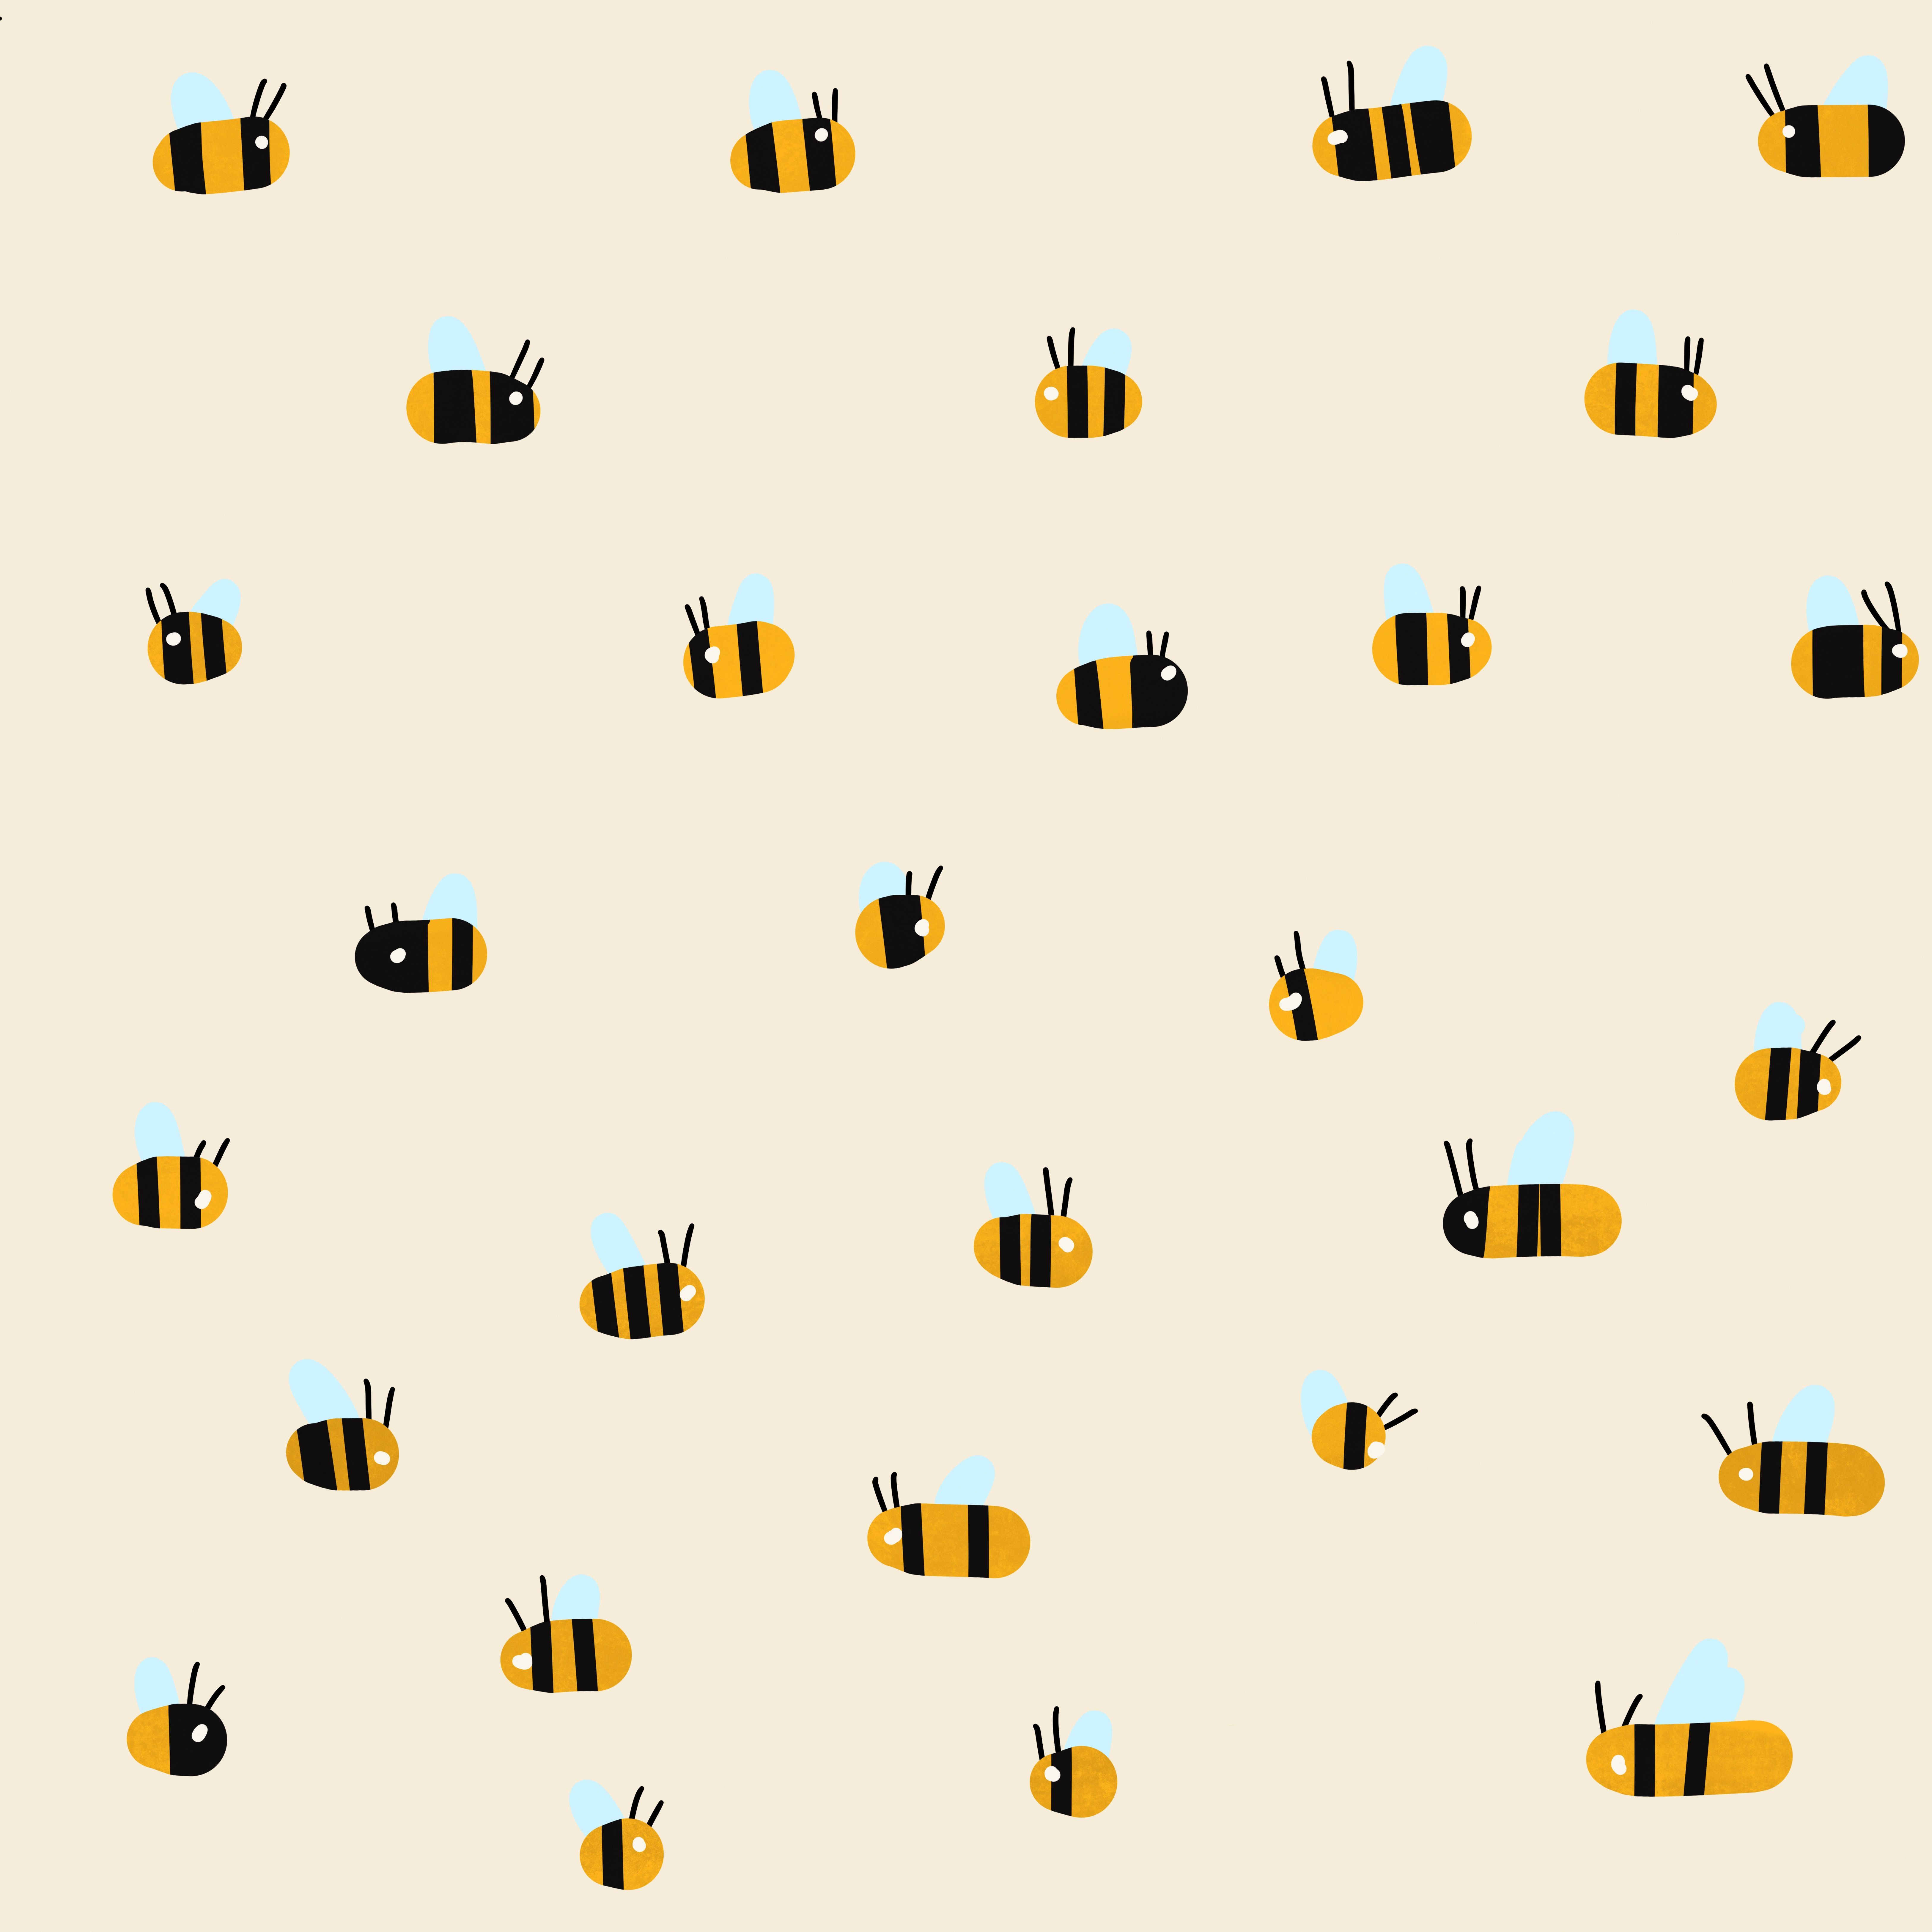 Bees flying around. Phone wallpaper patterns, Cute patterns wallpaper, iPhone background wallpaper